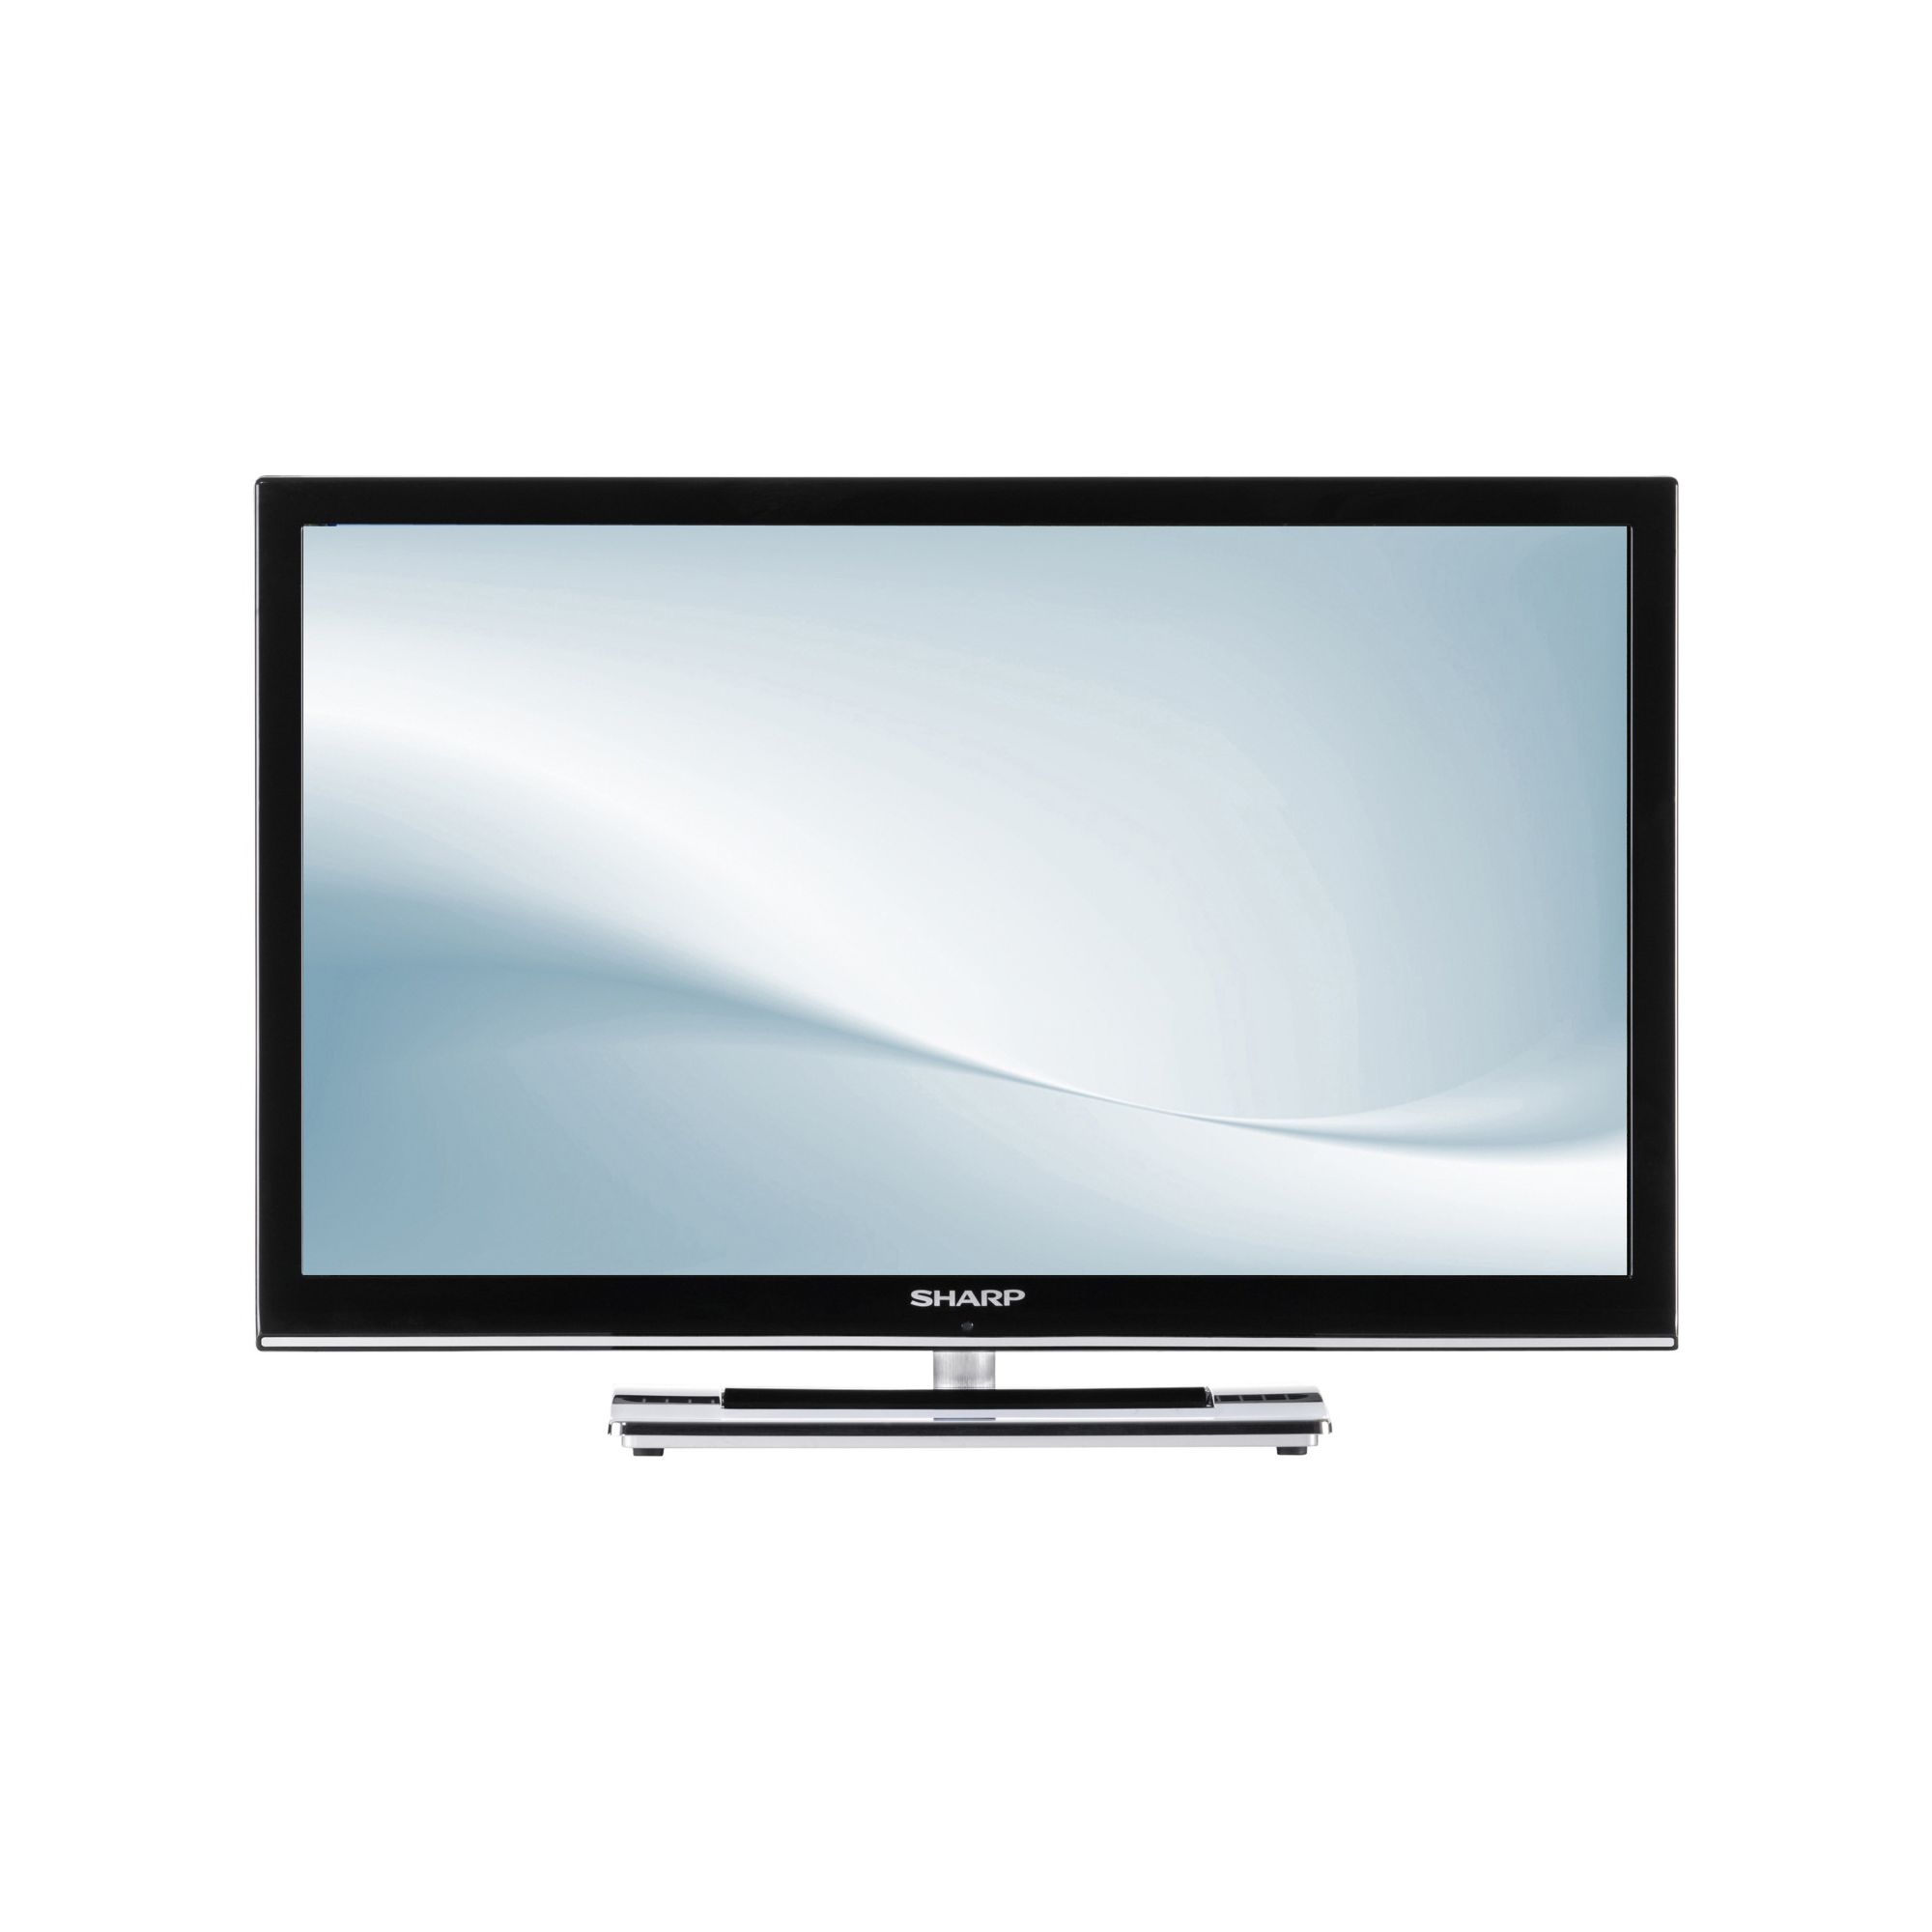 Sharp 24DV250K 24 Inch HD Ready 720p LED TV/DVD Combi with Freeview